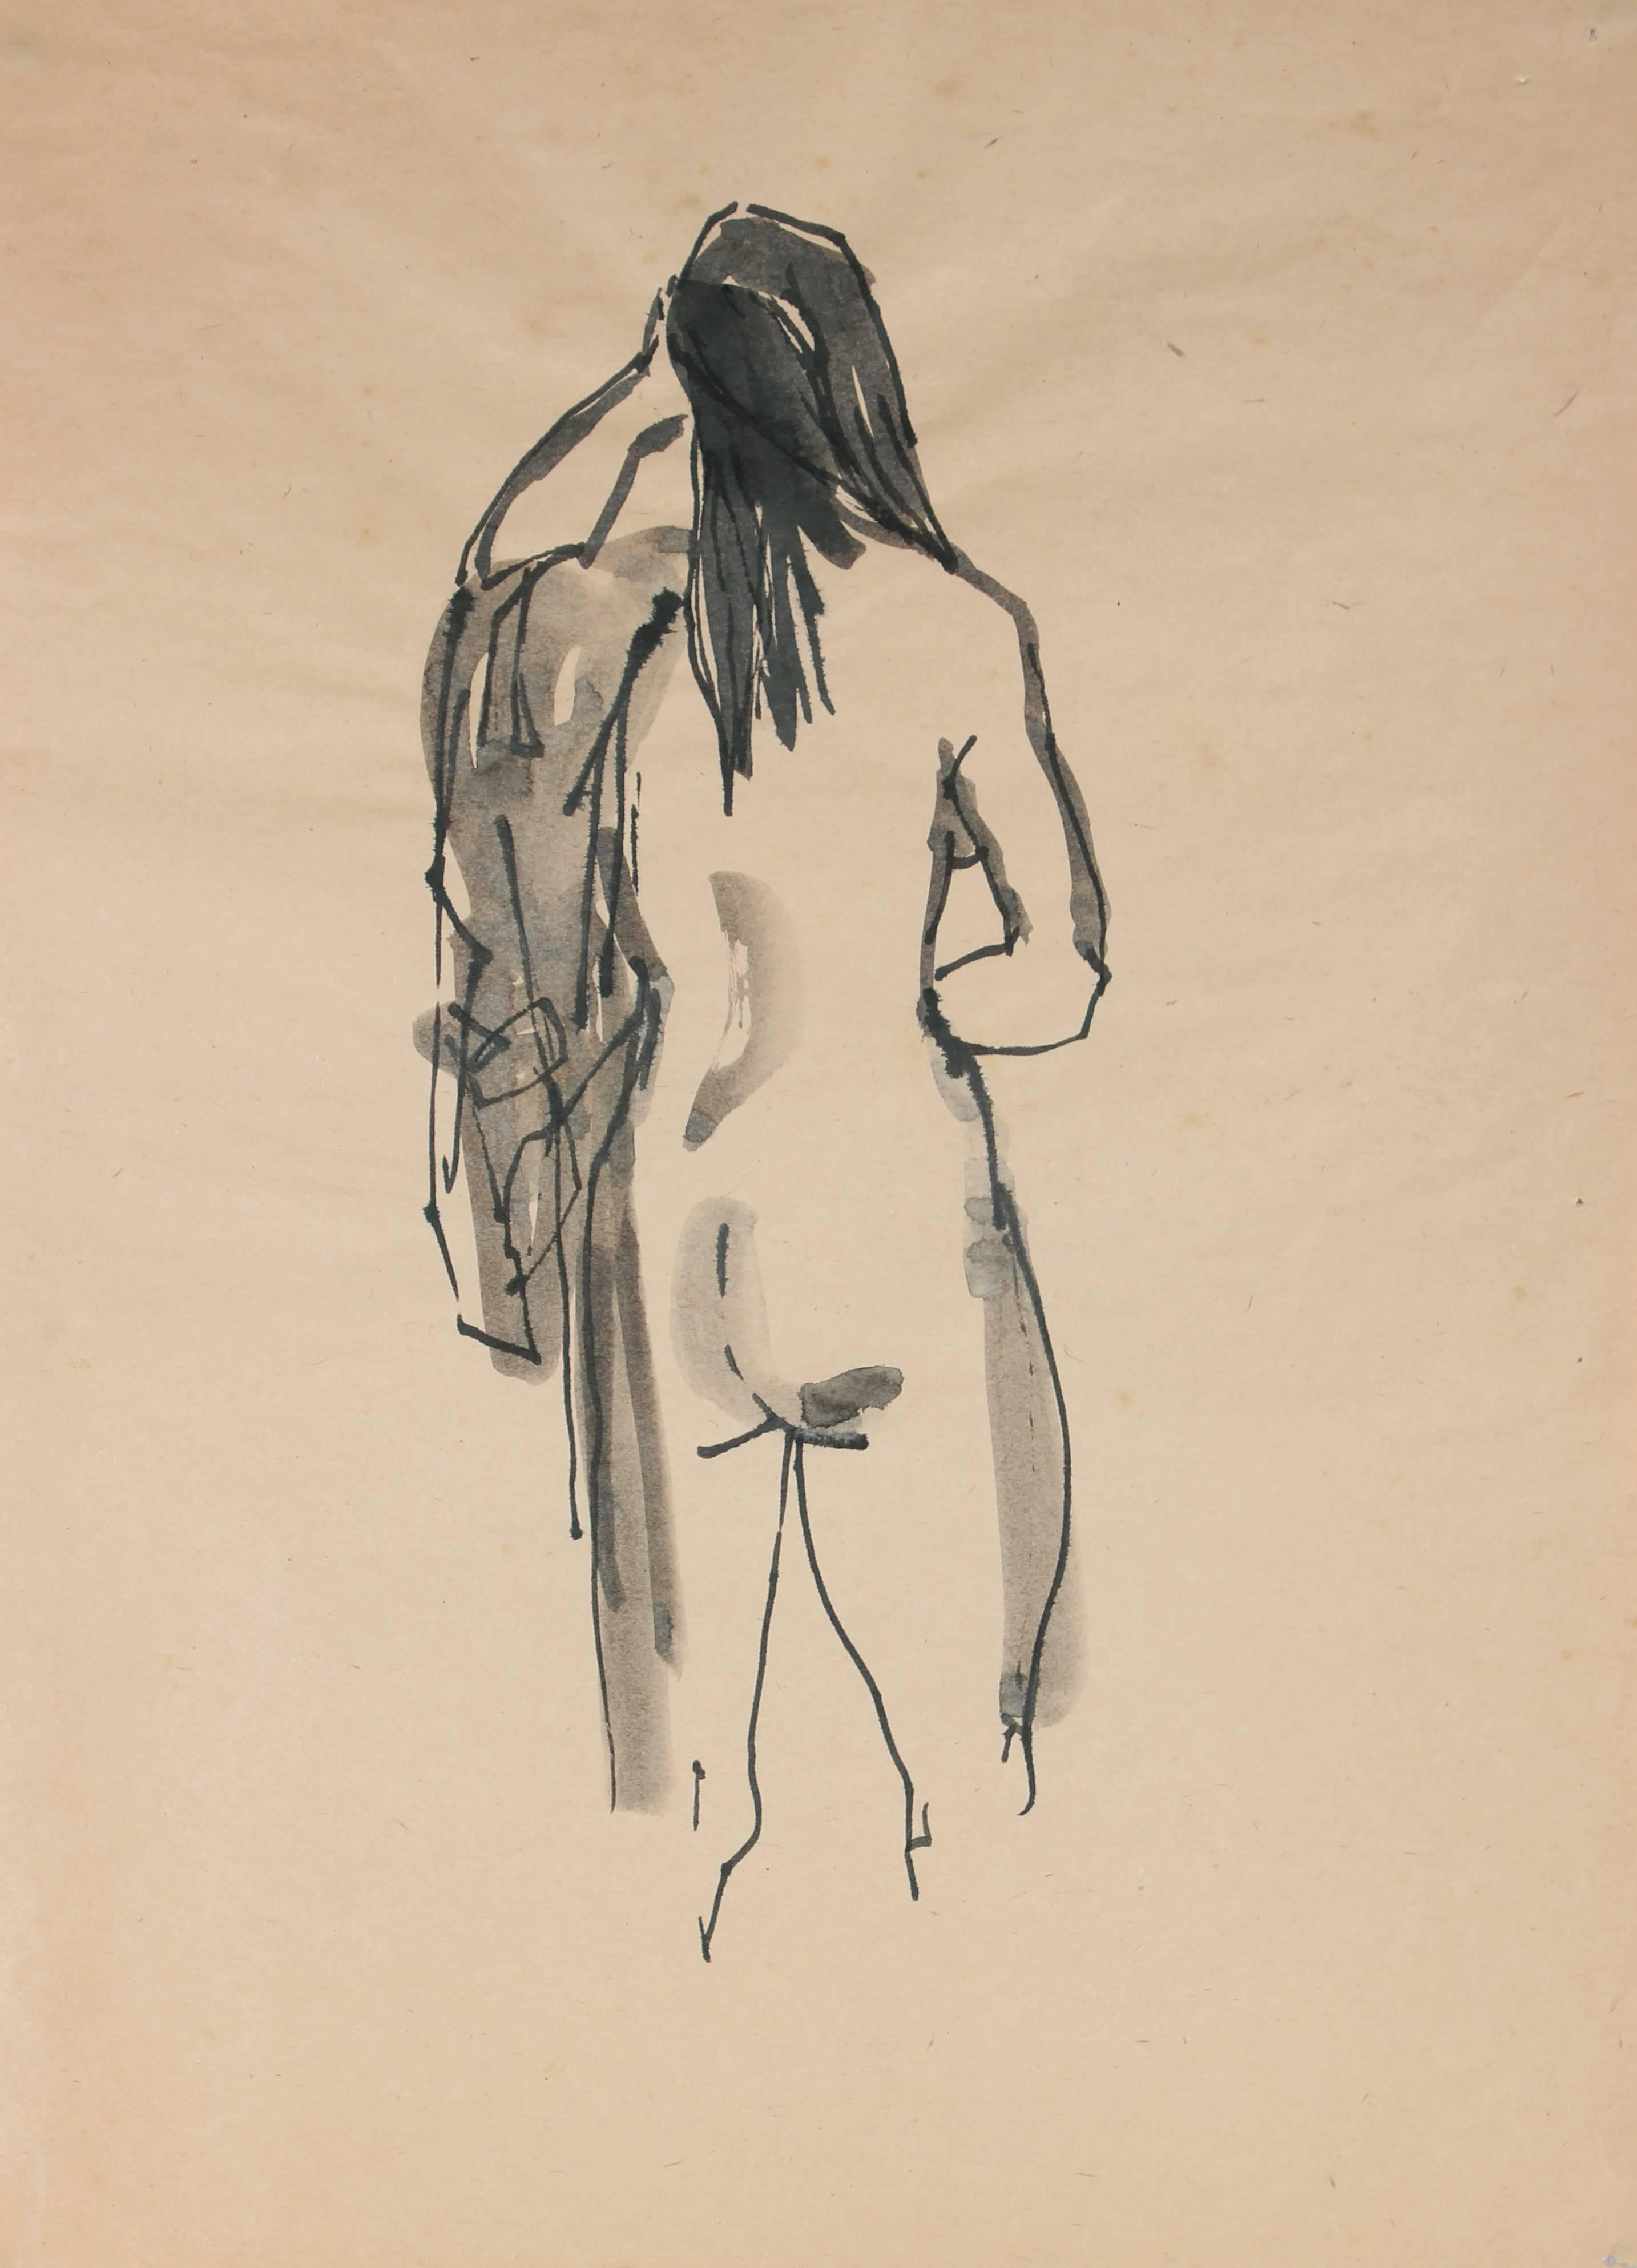 Standing Nude with Coat, Ink Drawing, 20th Century - Art by Rip Matteson